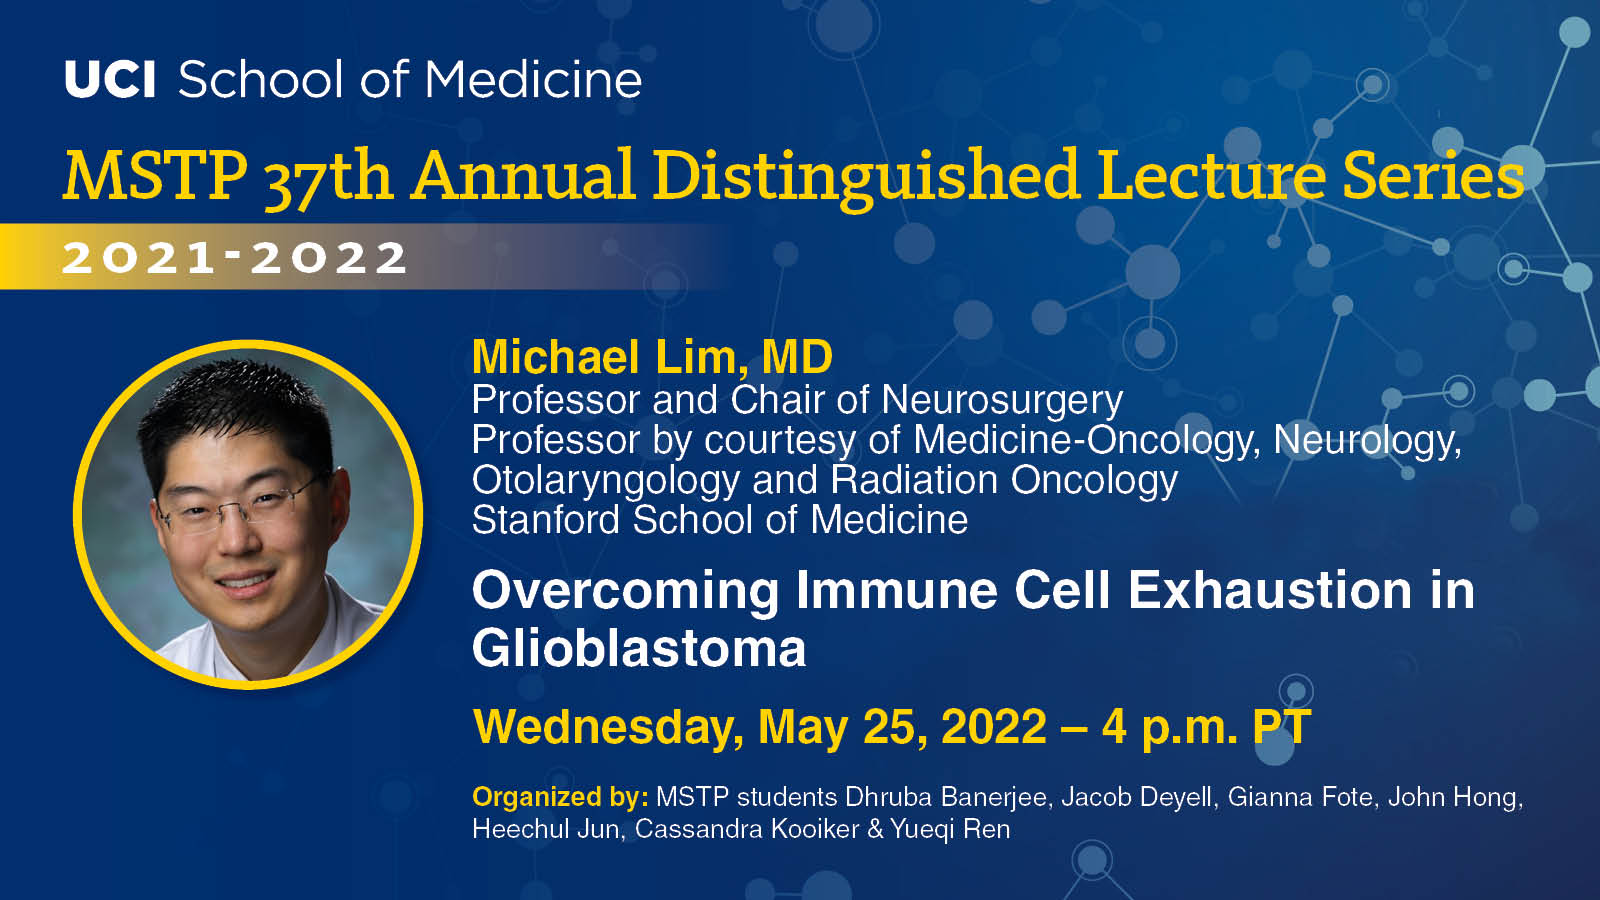 MSTP 37th annual distinguished lecture series with Michael Lim MD